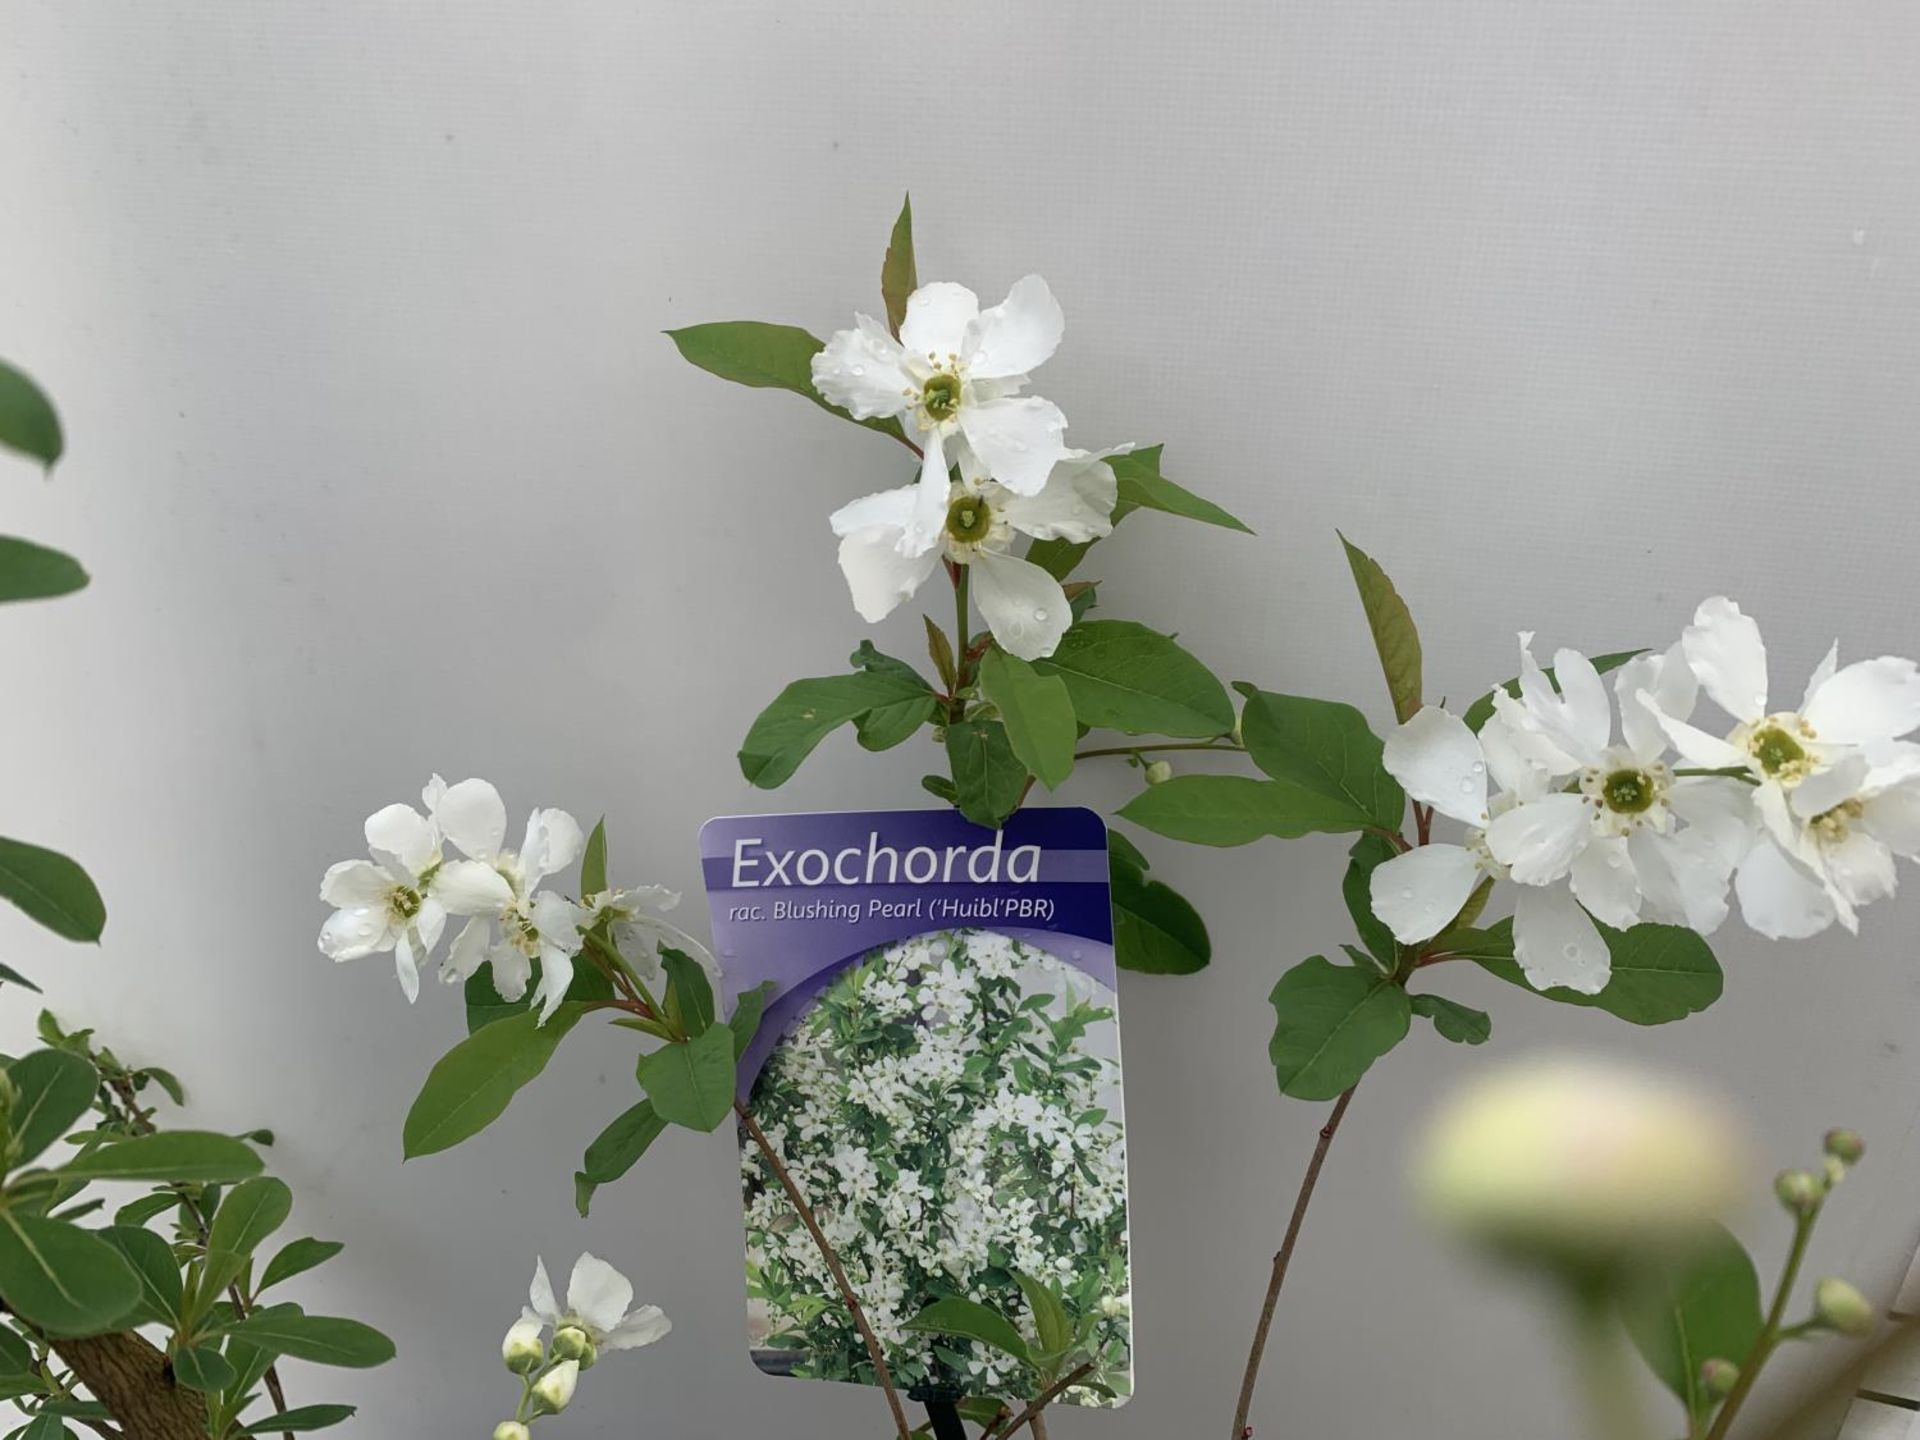 TWO EXOCHORDA 'NIAGARA' AND 'BLUSHING PEARL' APPROX 60CM IN HEIGHT IN 2 LTR POTS PLUS VAT TO BE SOLD - Image 3 of 6